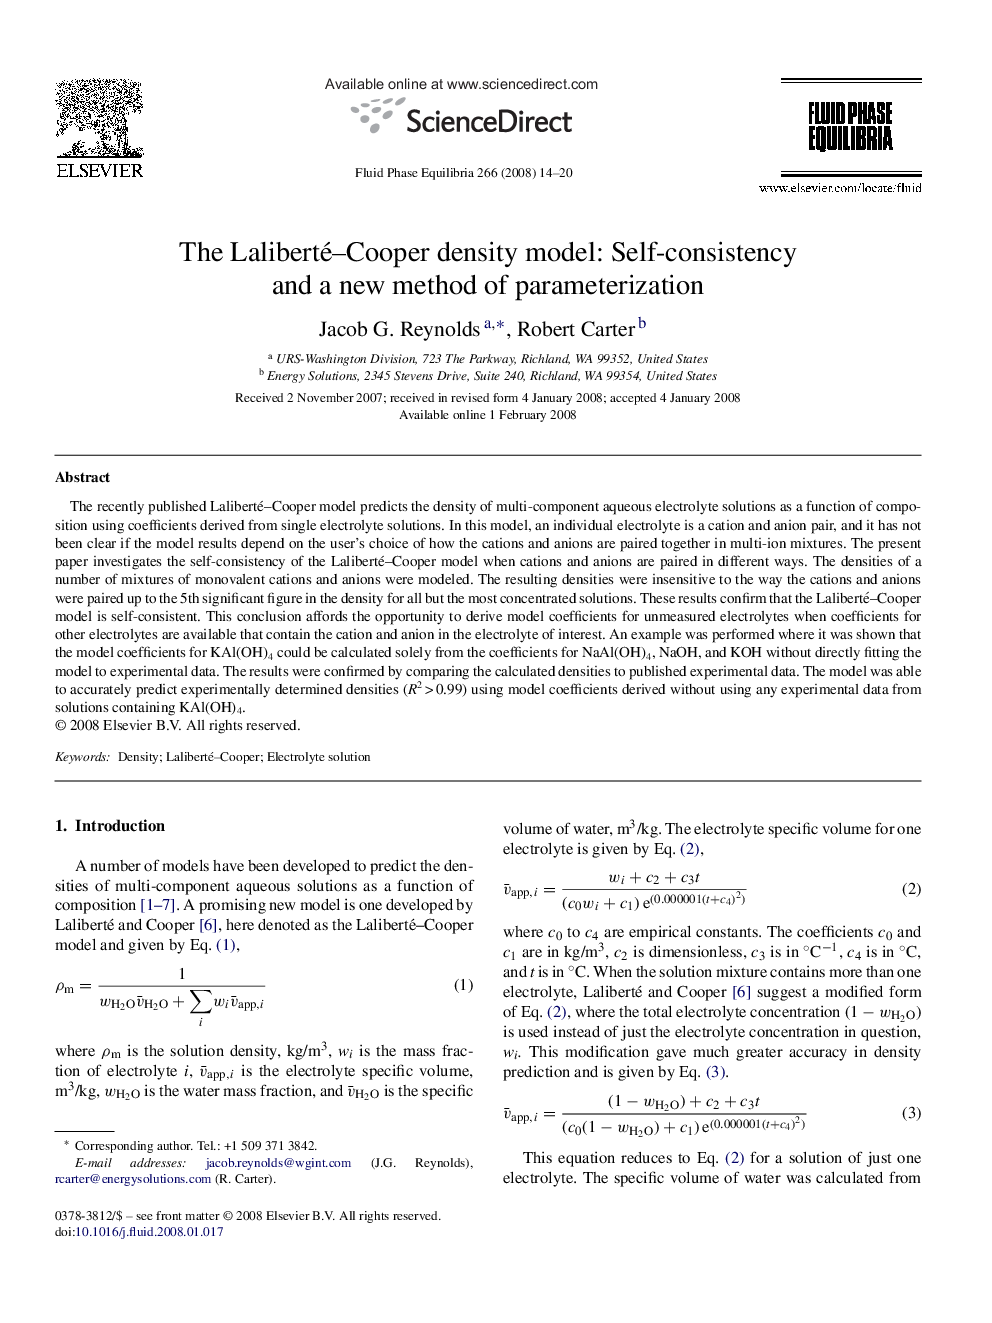 The Laliberté–Cooper density model: Self-consistency and a new method of parameterization